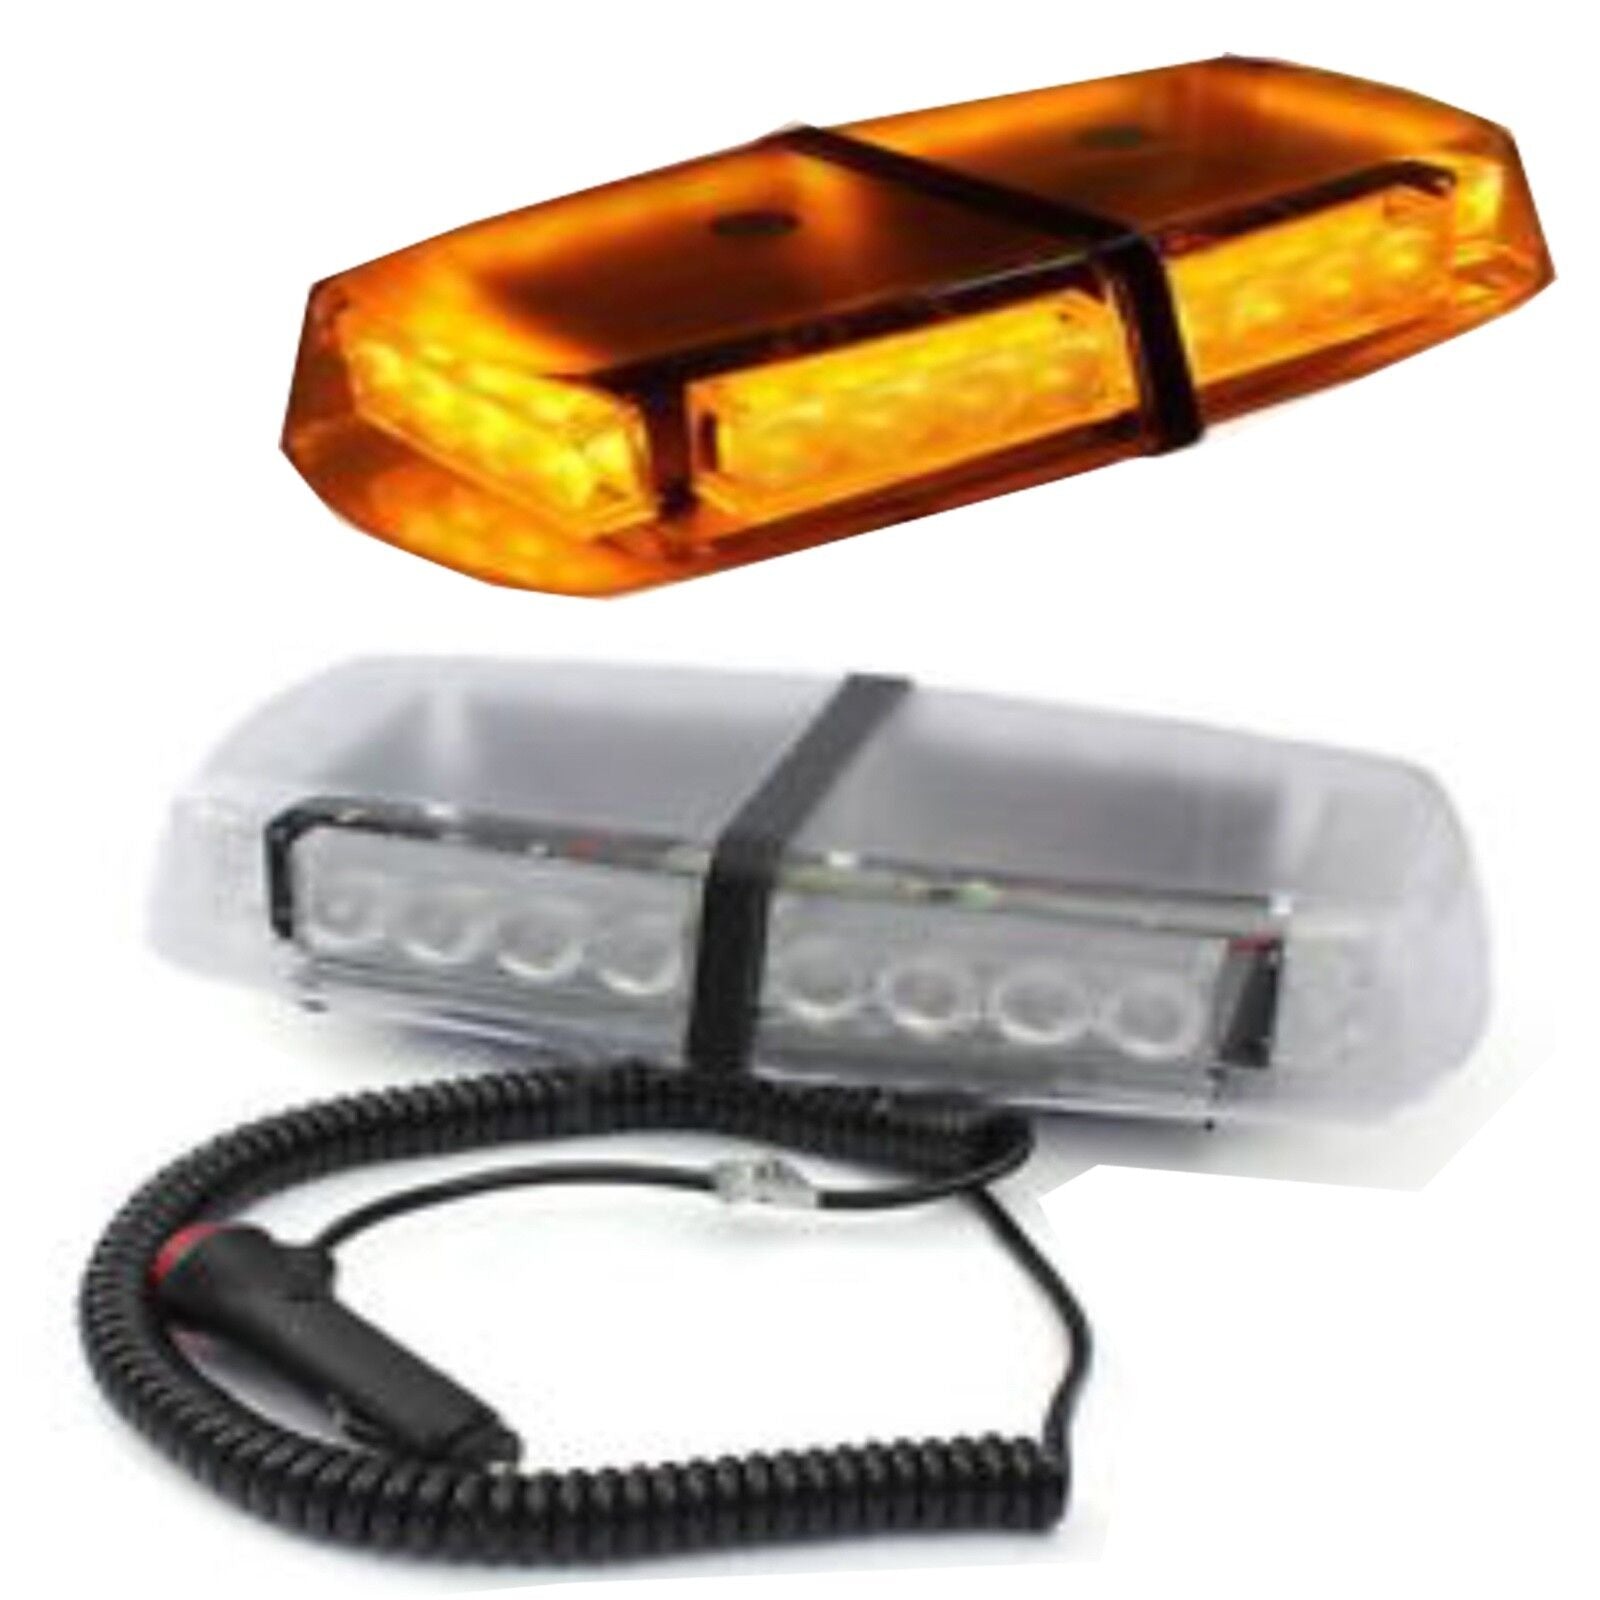 MAGNETIC ROOF FLASHING BEACON BRIGHT AMBER